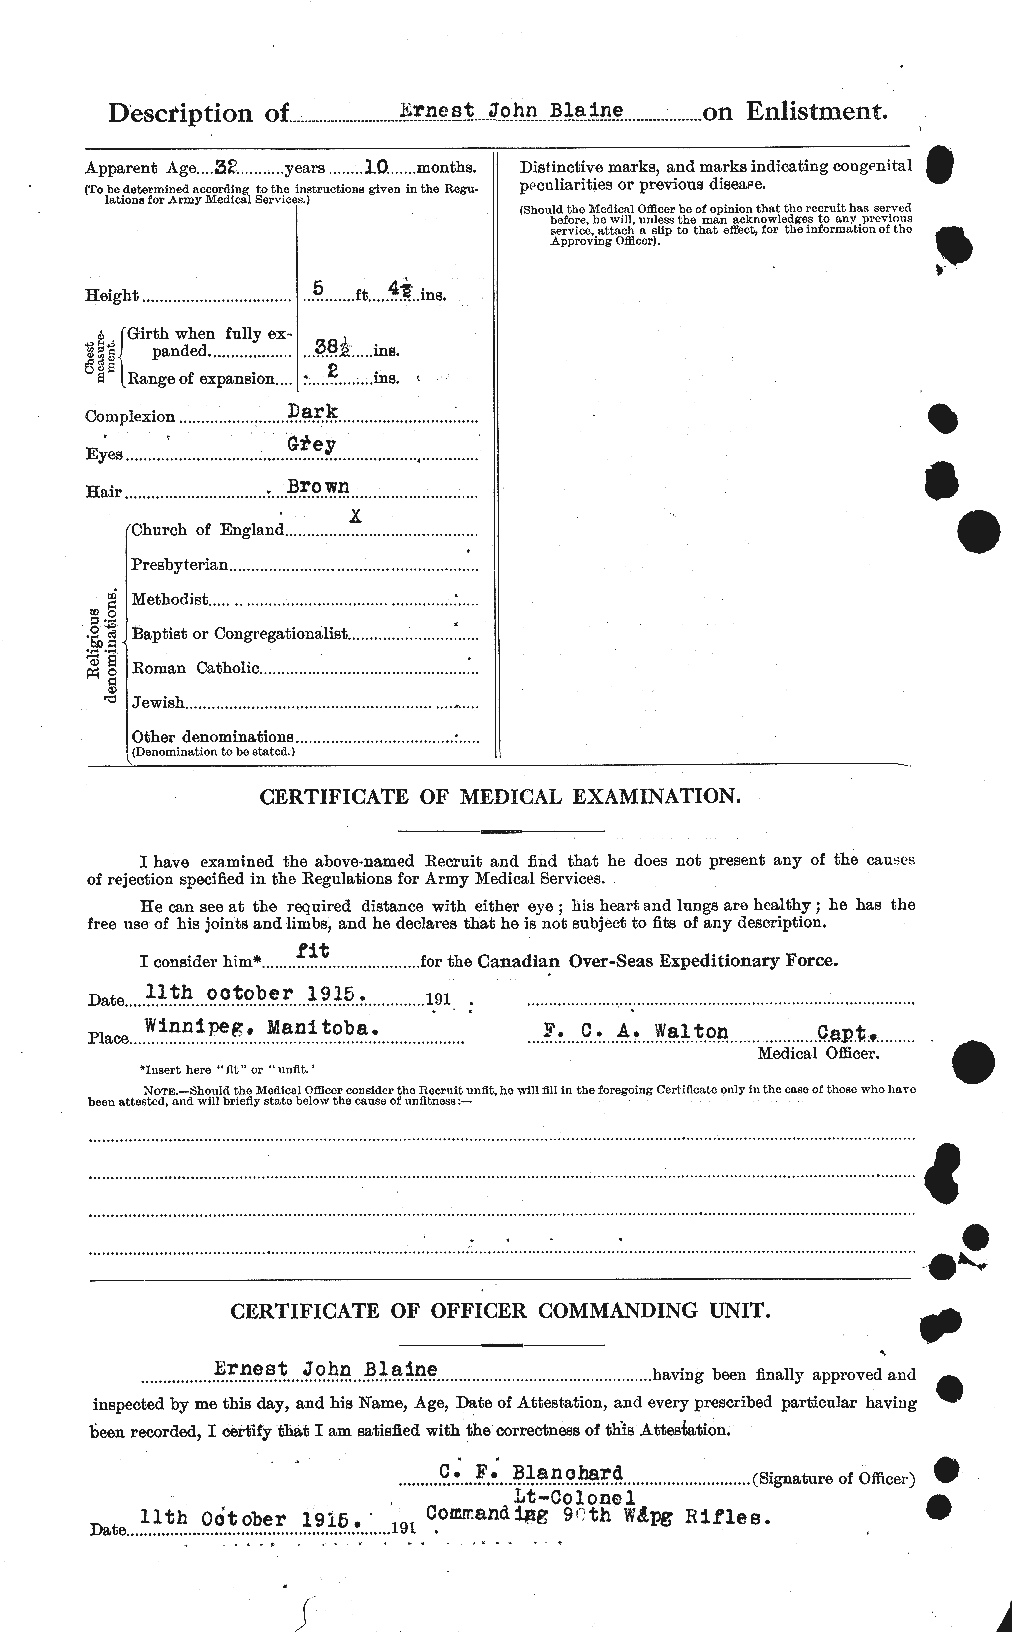 Personnel Records of the First World War - CEF 246047b